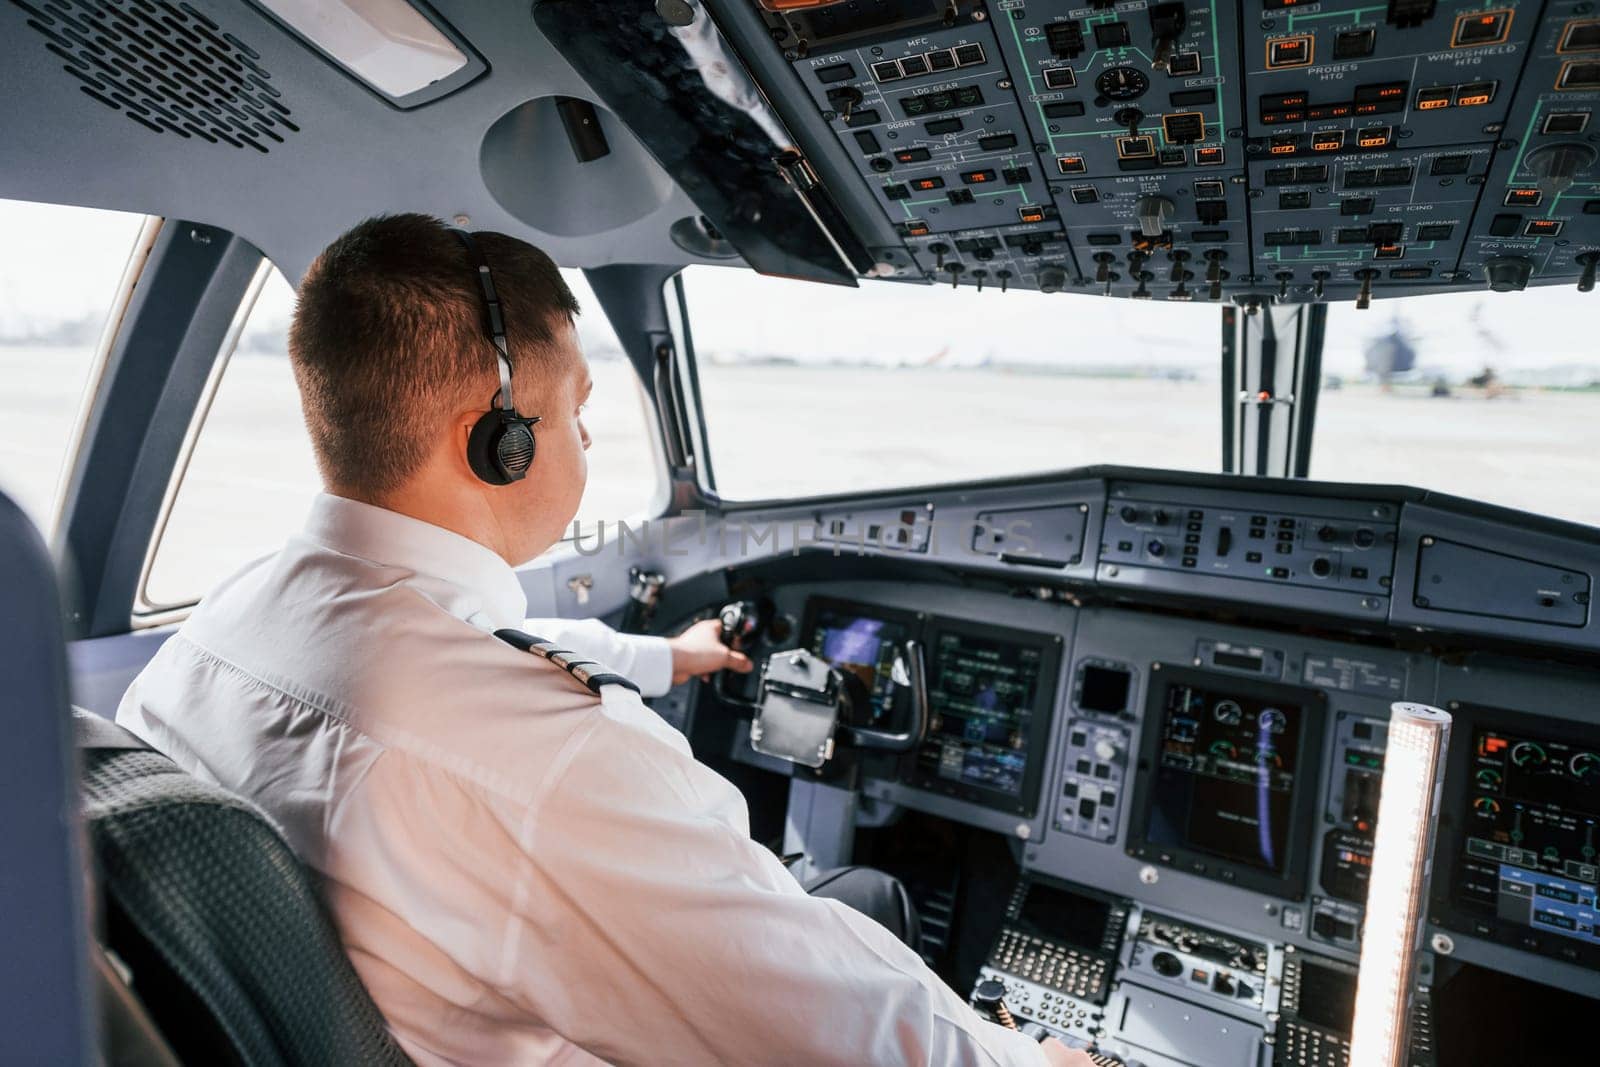 Pilot on the work in the passenger airplane. Preparing for takeoff by Standret